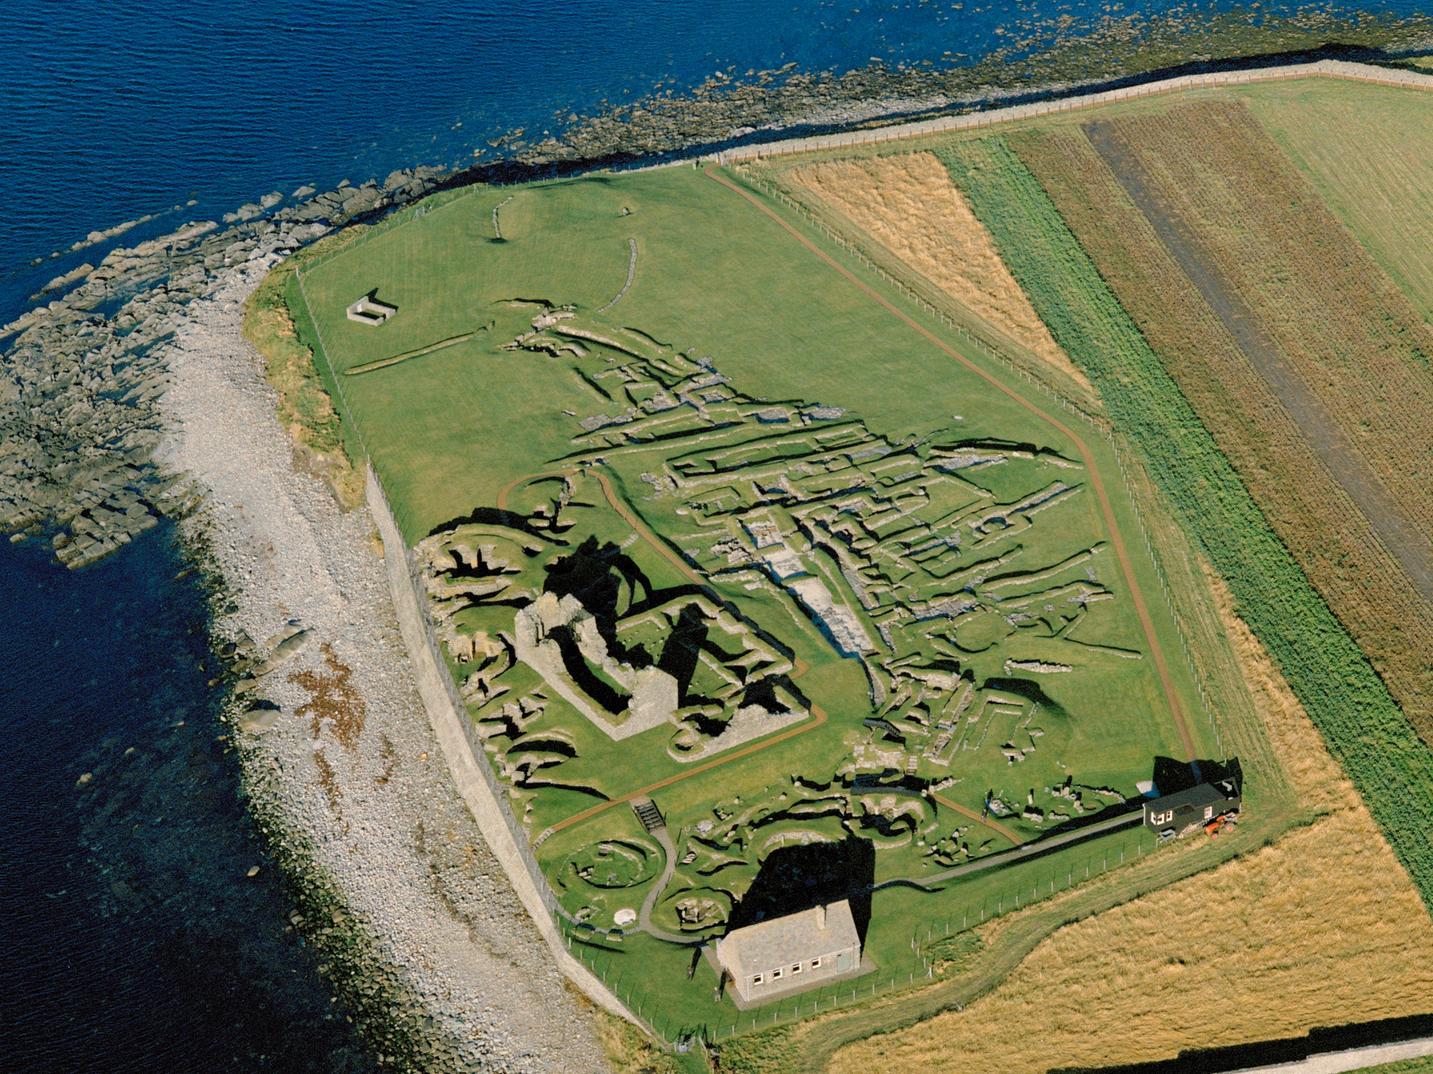 The Jarlshof  settlement in Shetland first appeared around 2,500 BC and was later developed by the Picts and the Vikings. The shallow bay here offered good trade links, stones for building and access to food.